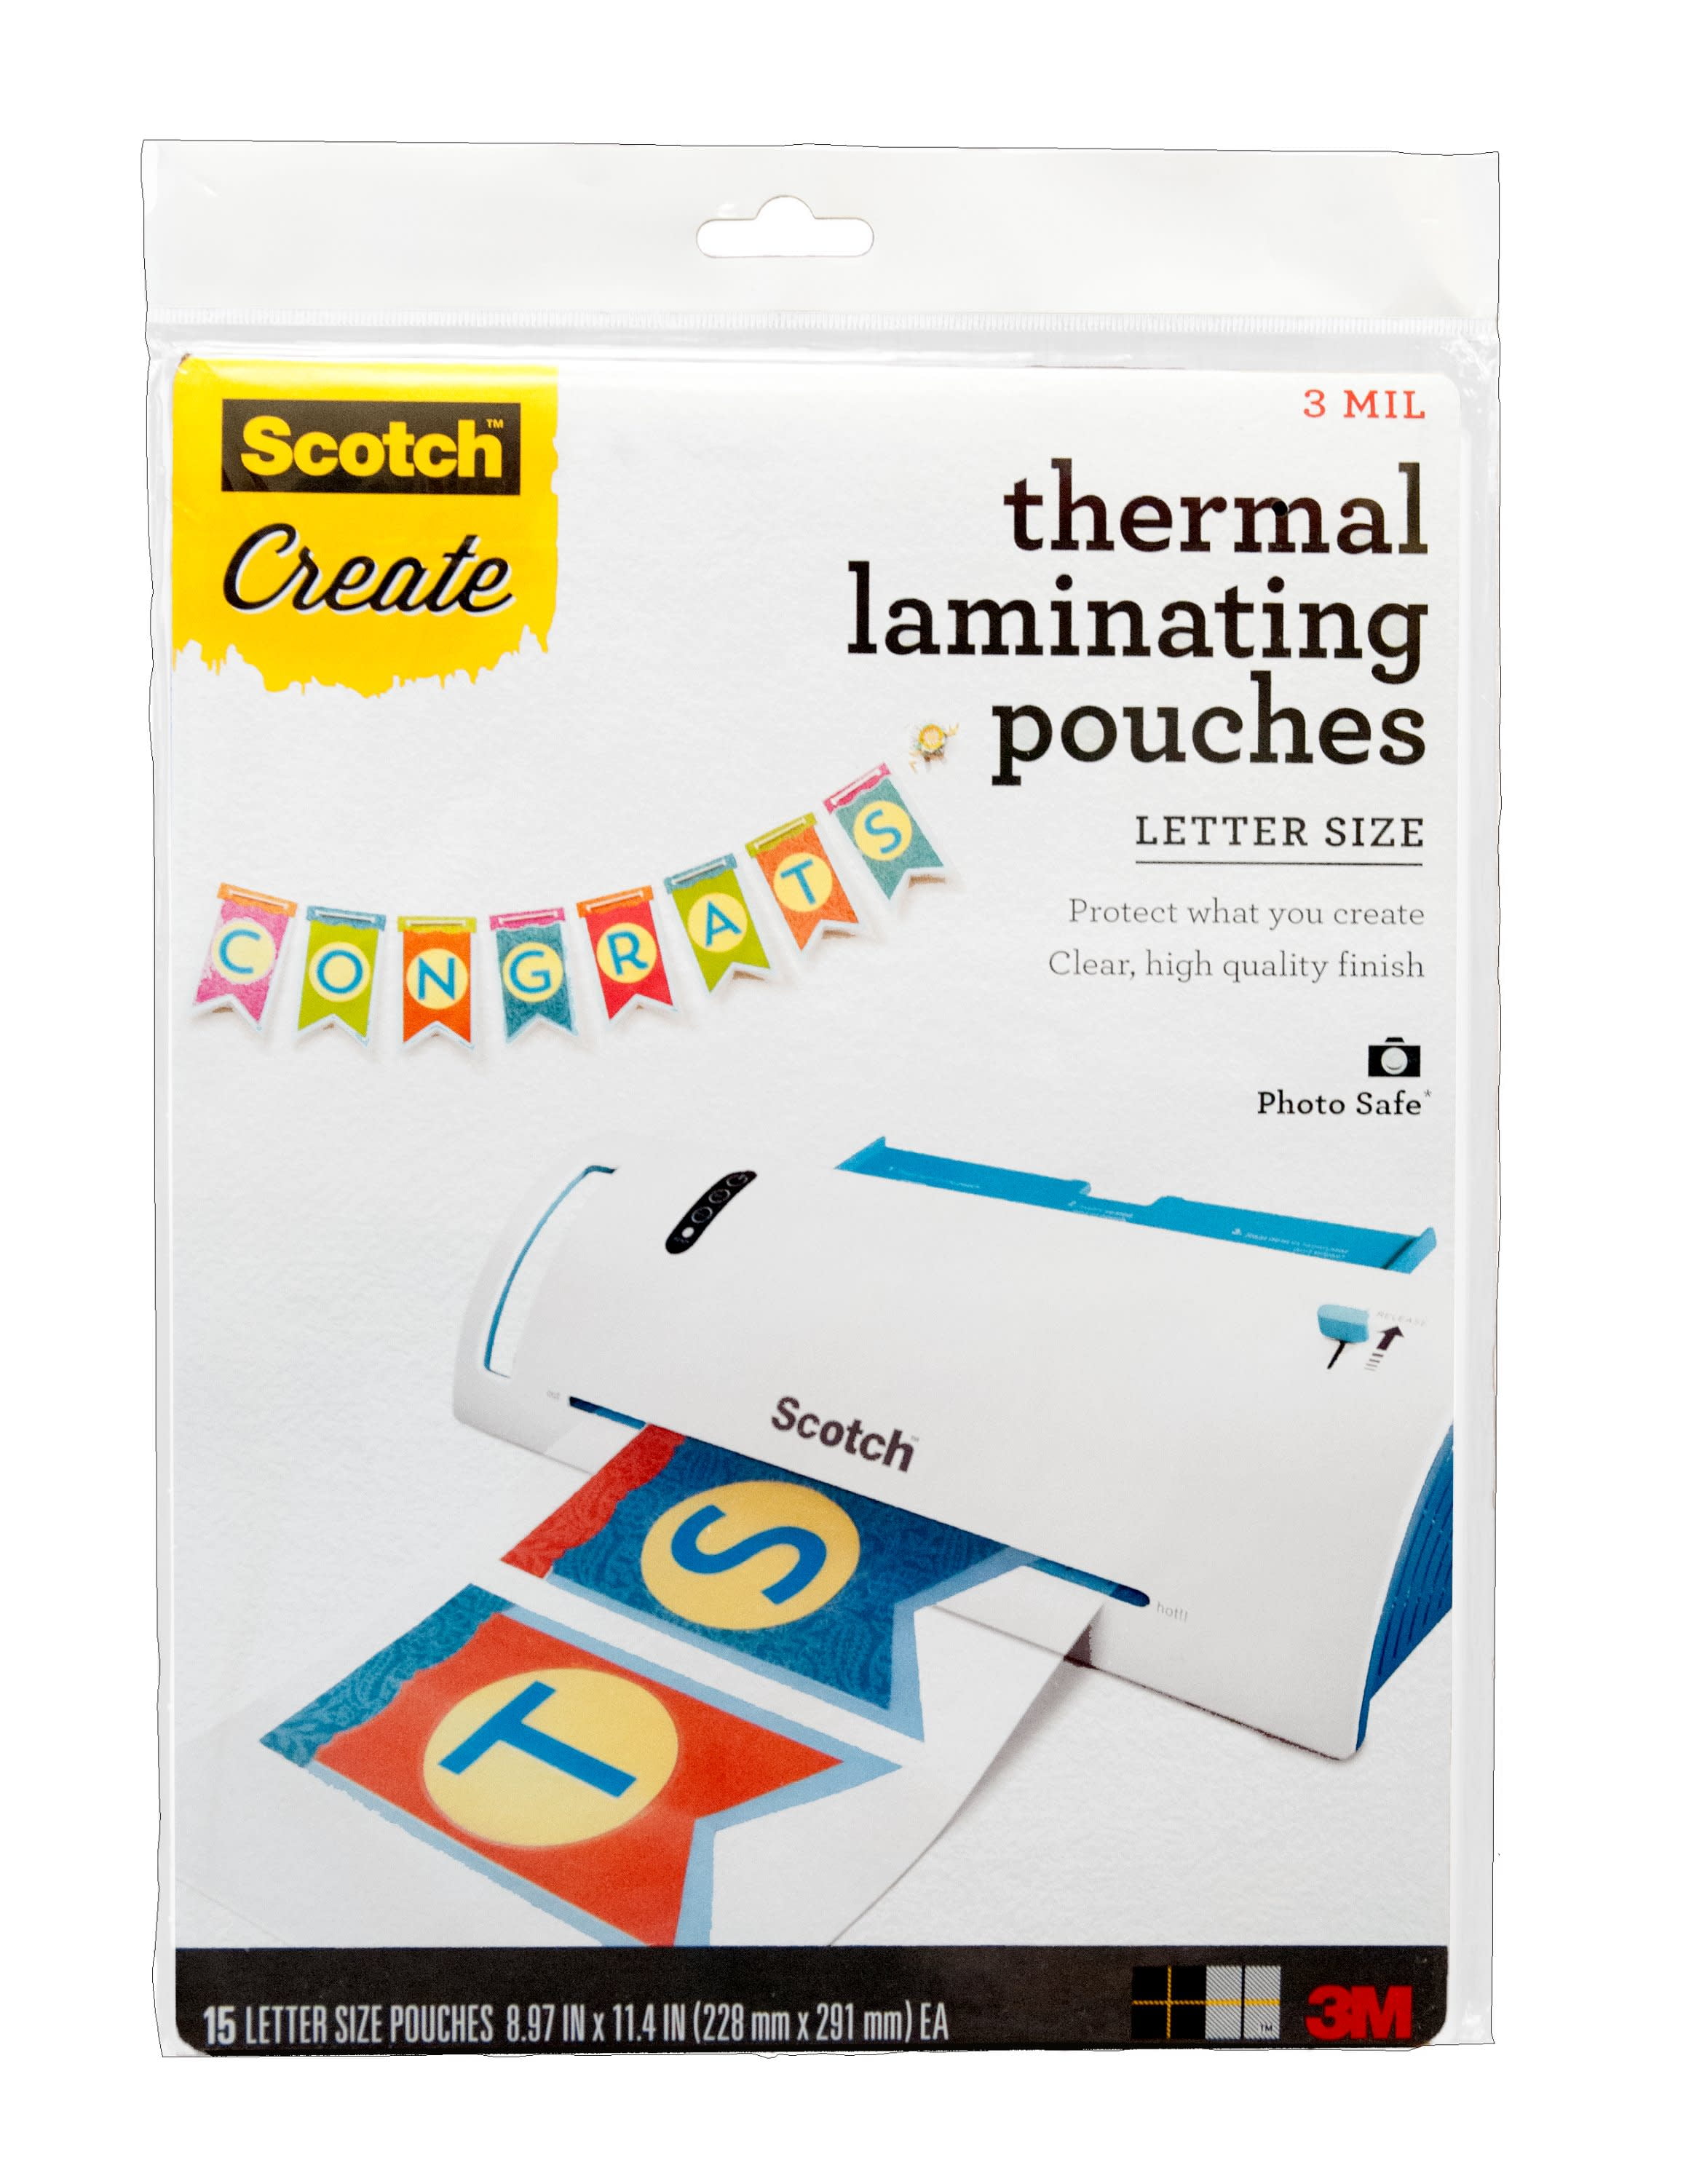 Hot 3 Mil Letter size LAM-IT-ALL Laminating Pouches 9 x 11-1/2 Clear 300 pc 